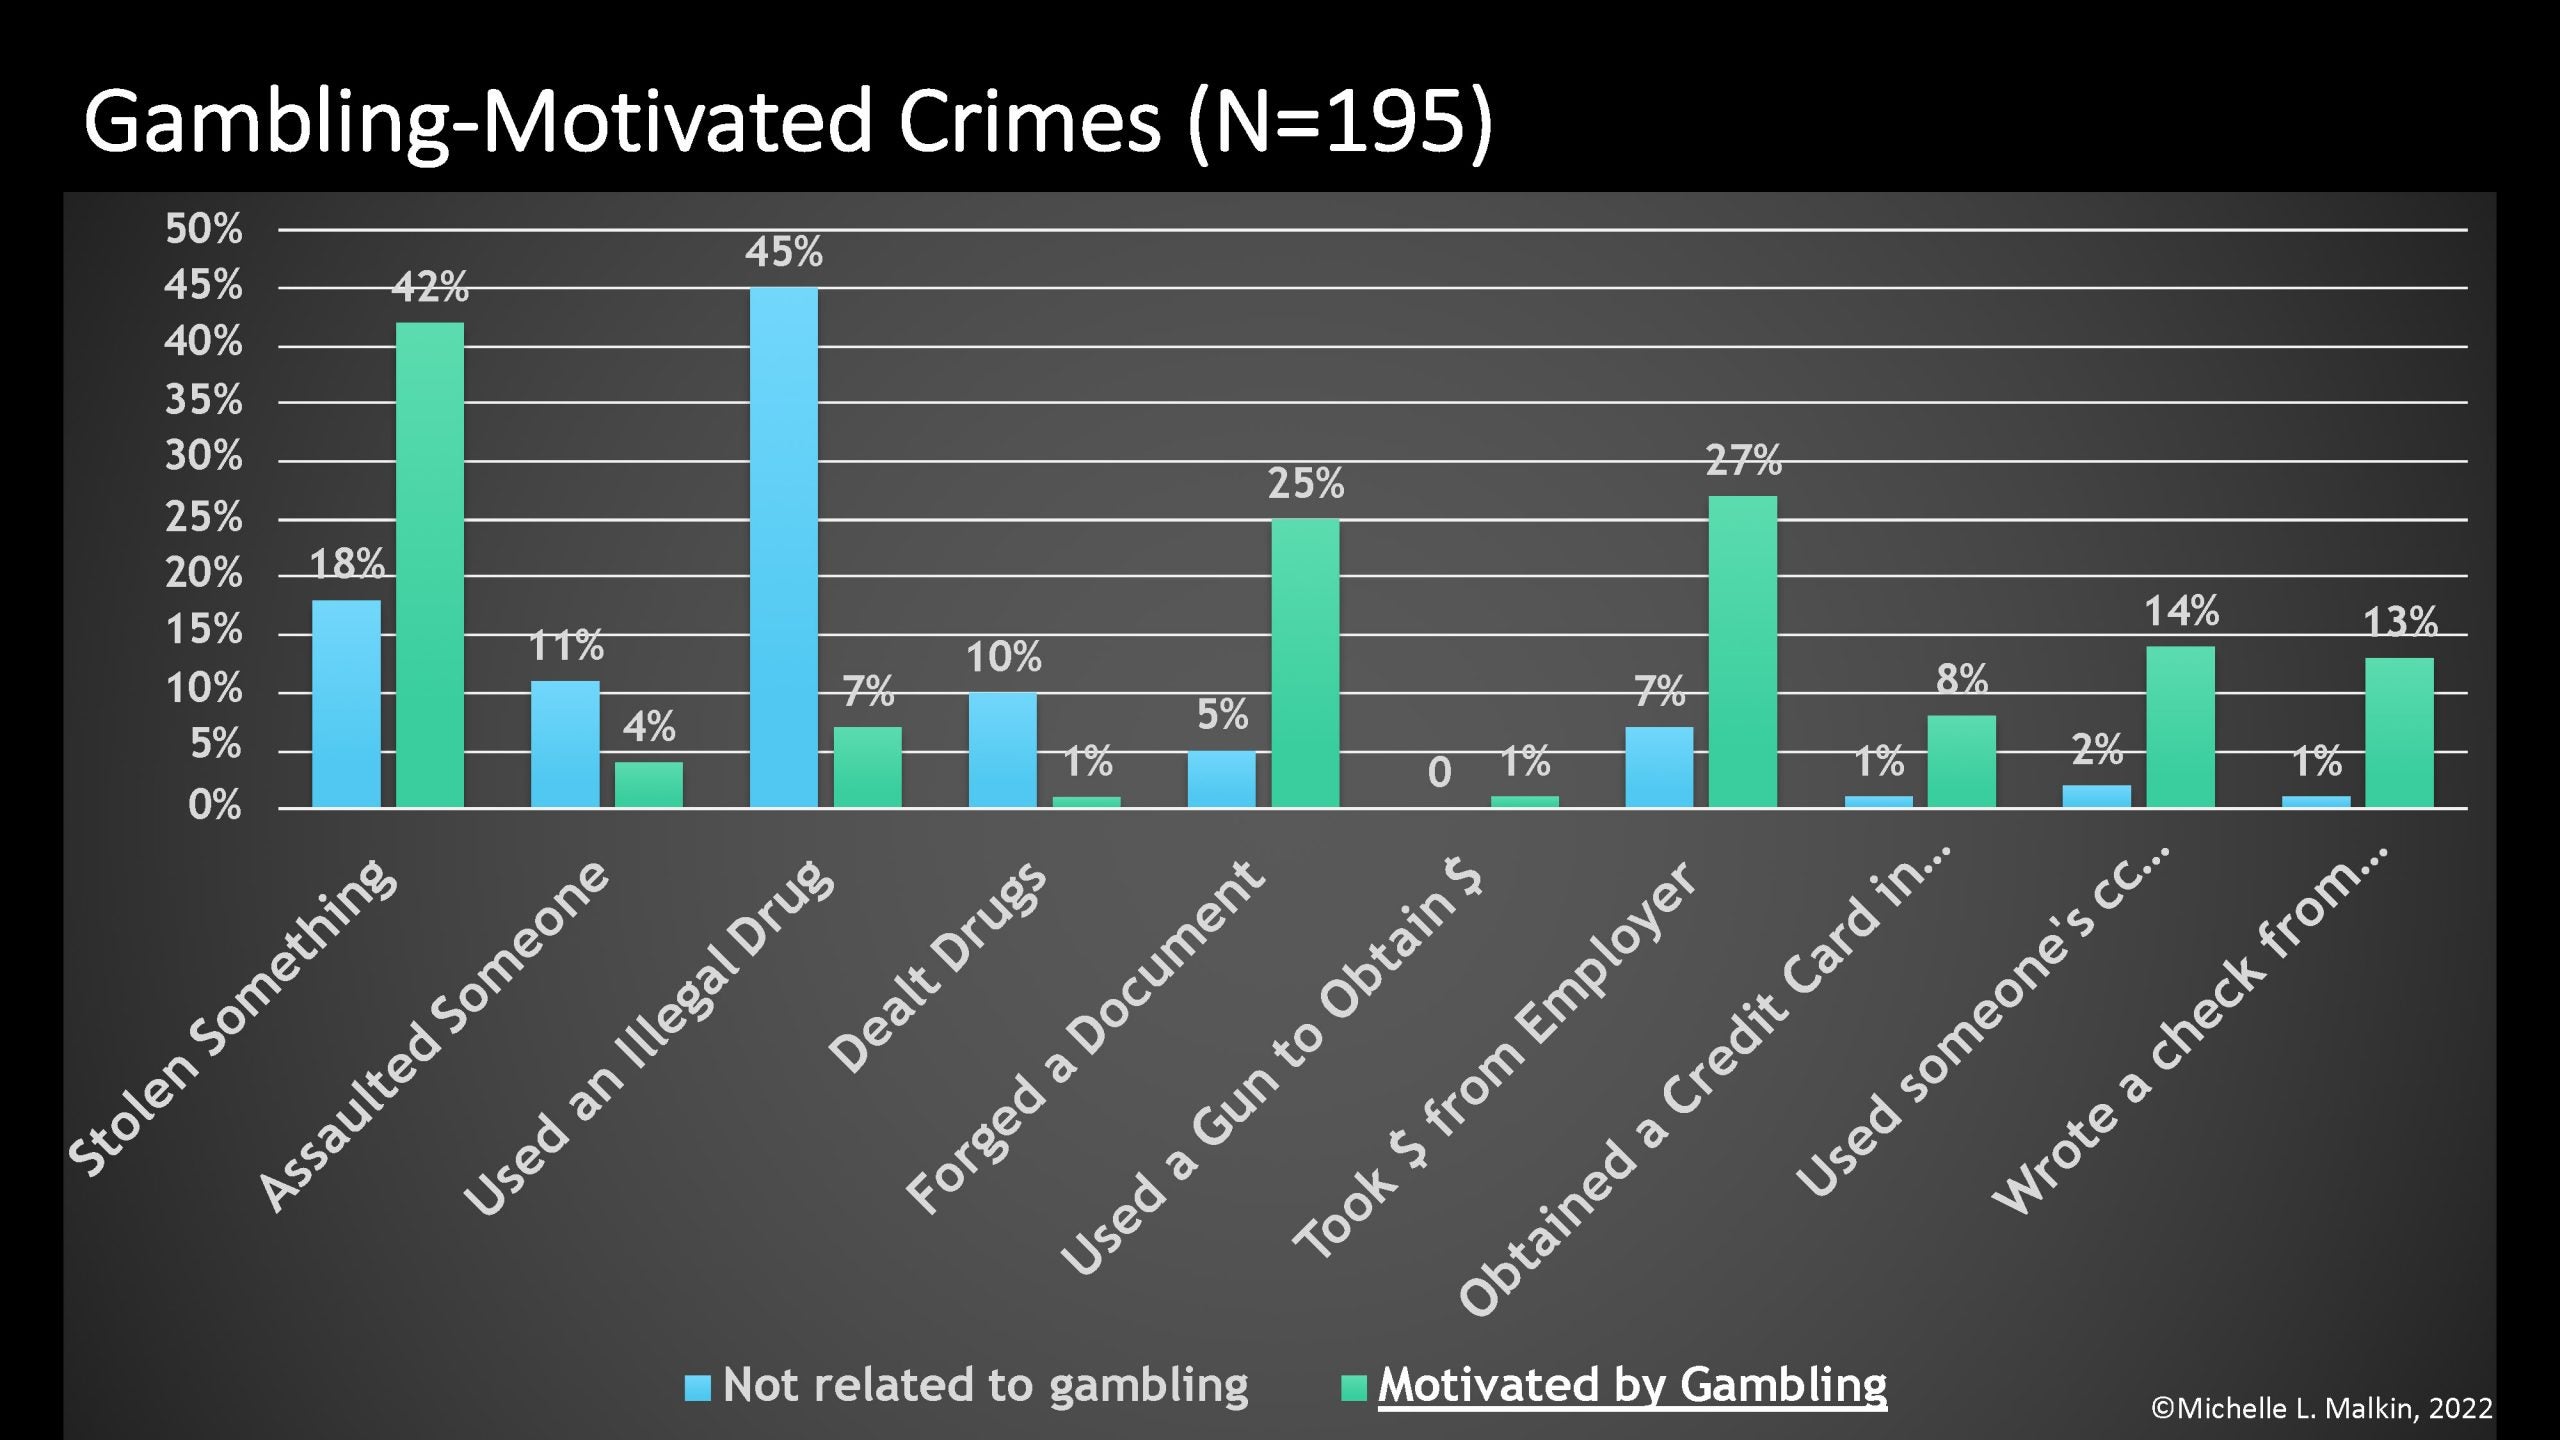 Research shows that theft, document forging and embezzlement are the top forms of gambling-motived crimes.